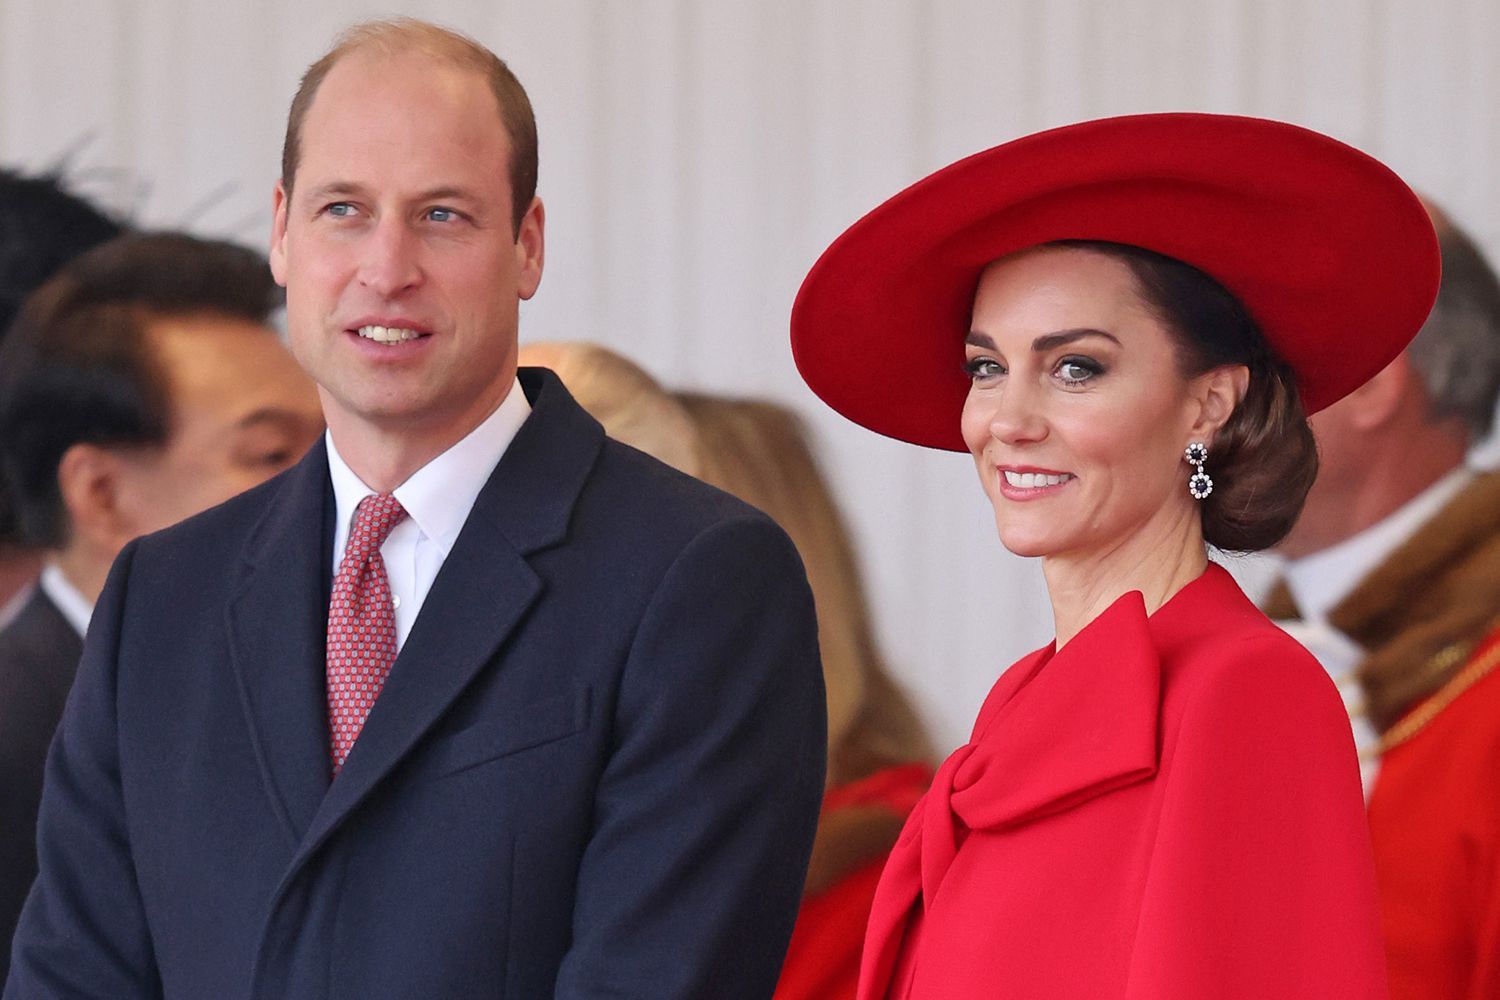 Prince William is dealing with ‘underlying anxiety’ amid Kate Middleton's cancer diagnosis